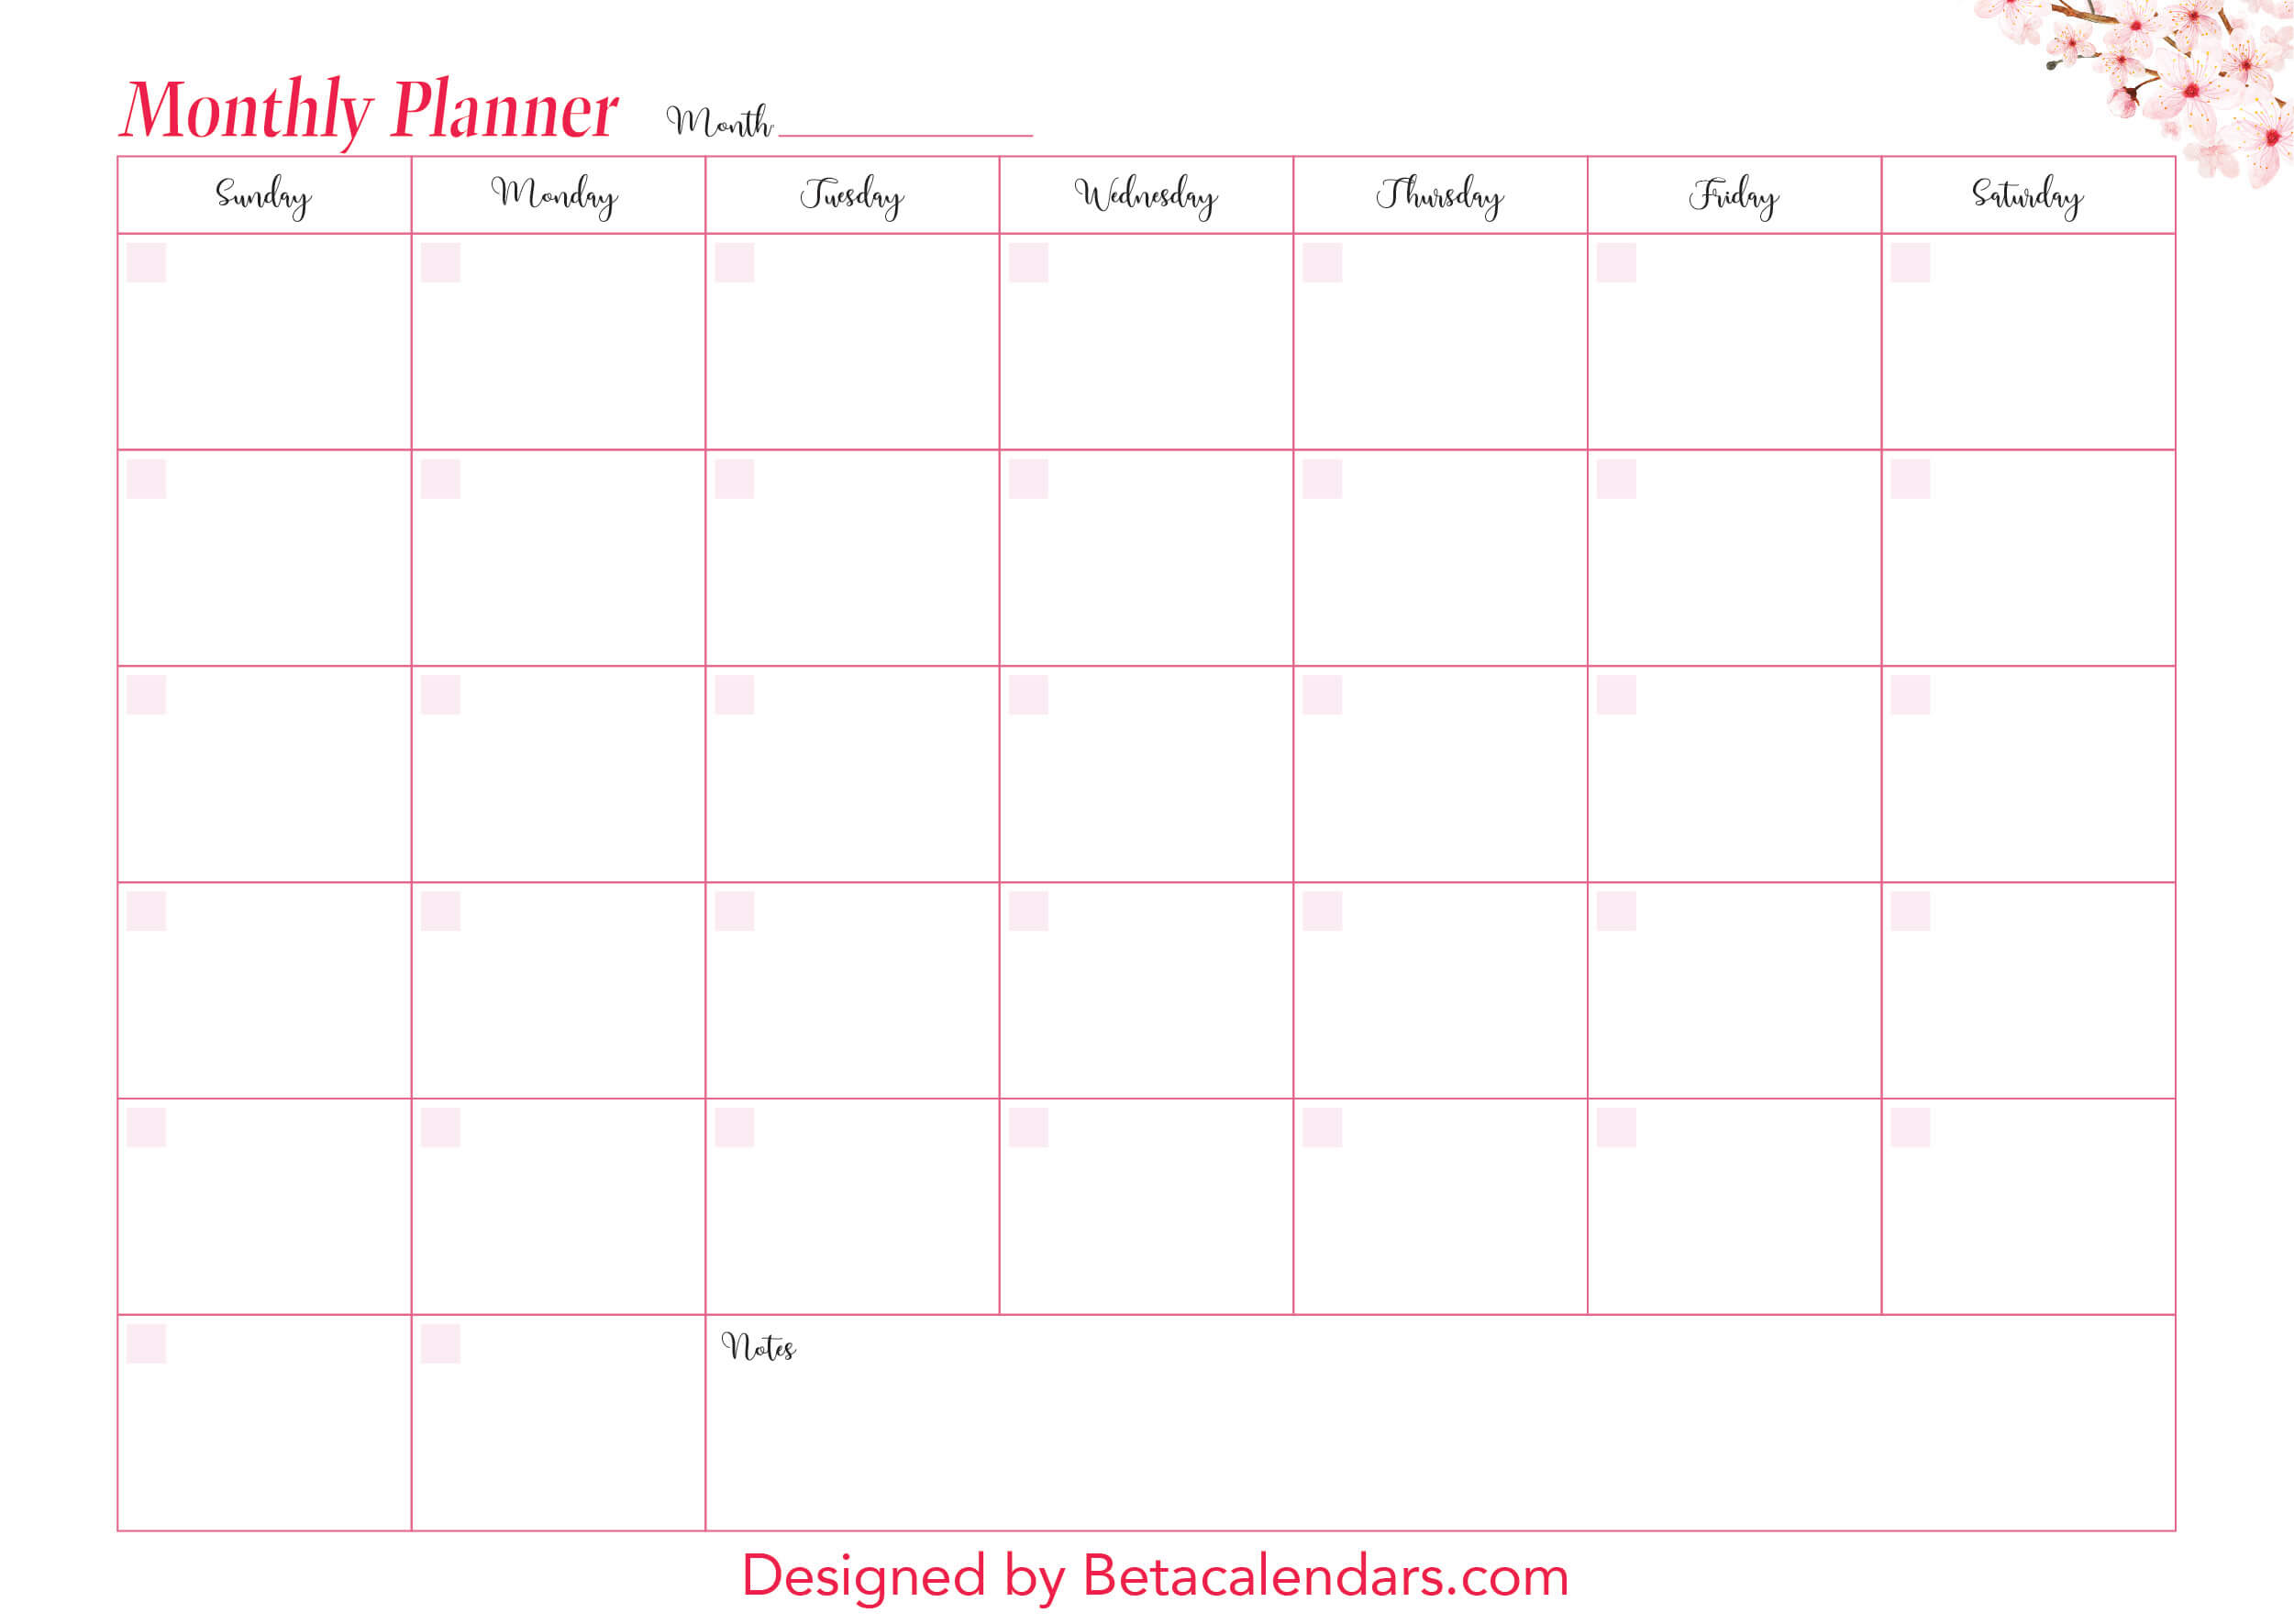 Monthly Planner Free Printable